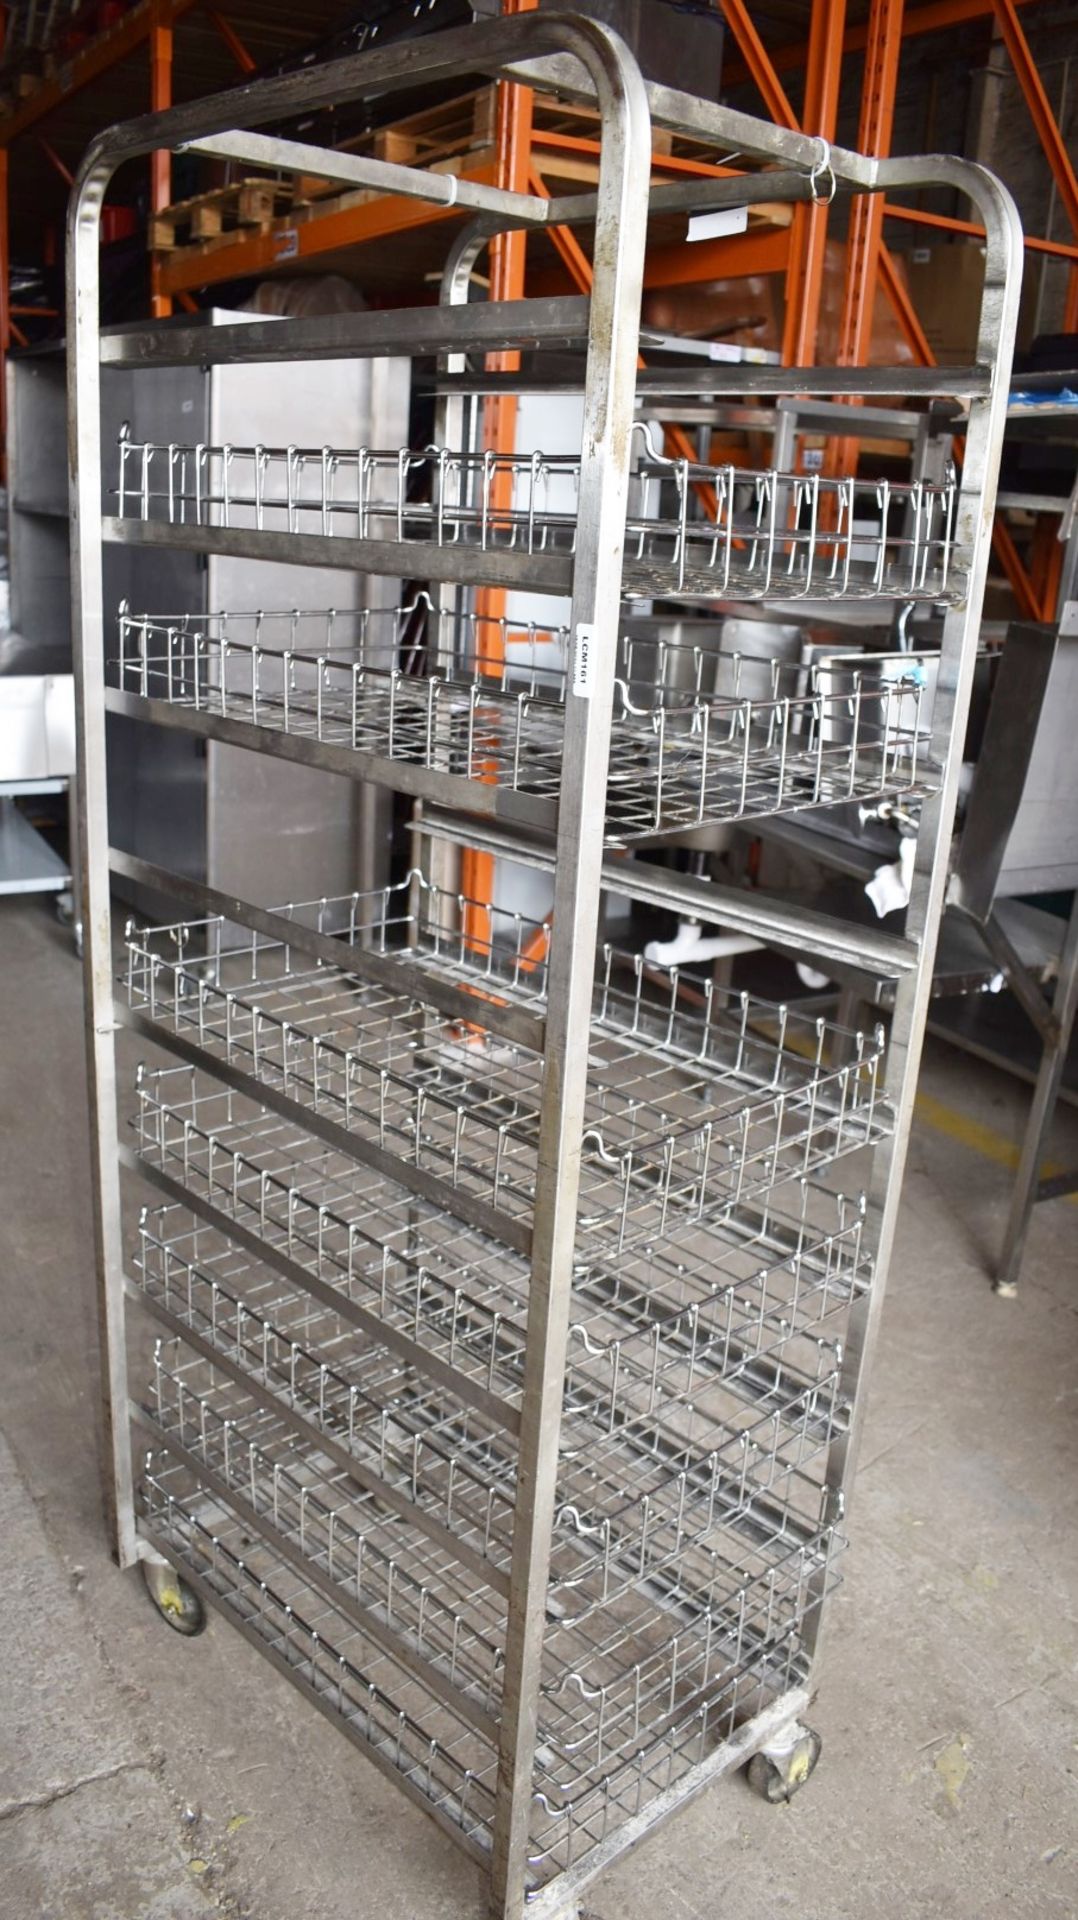 1 x Bakers 11 Tier Mobile Tray Rack With 7 Removable Wire Baskets - Stainless Steel With Castors -